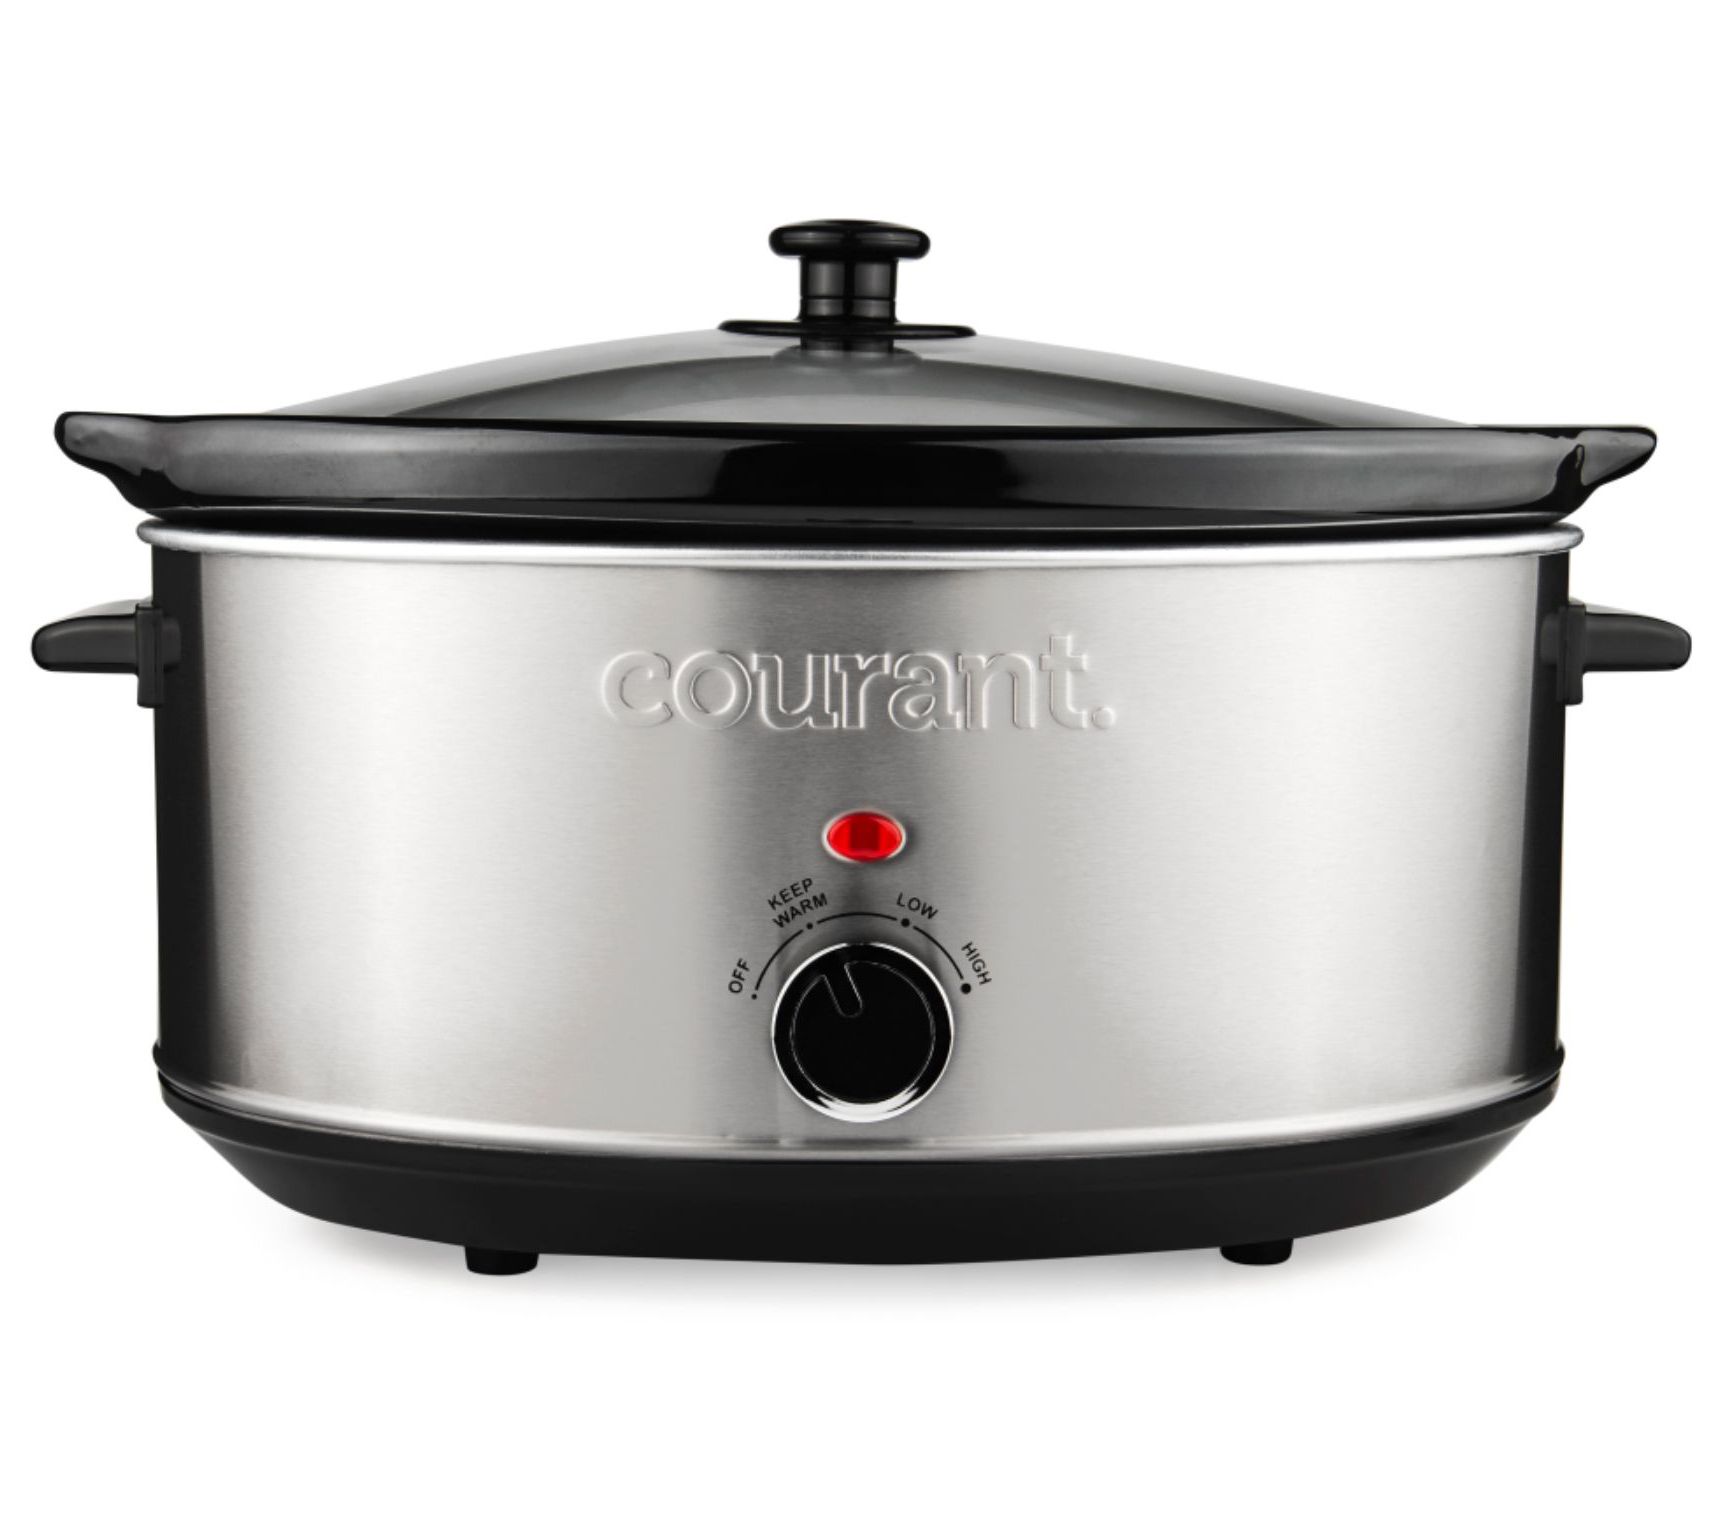 Courant 6-qt Locking Slow Cooker - Stainless Steel